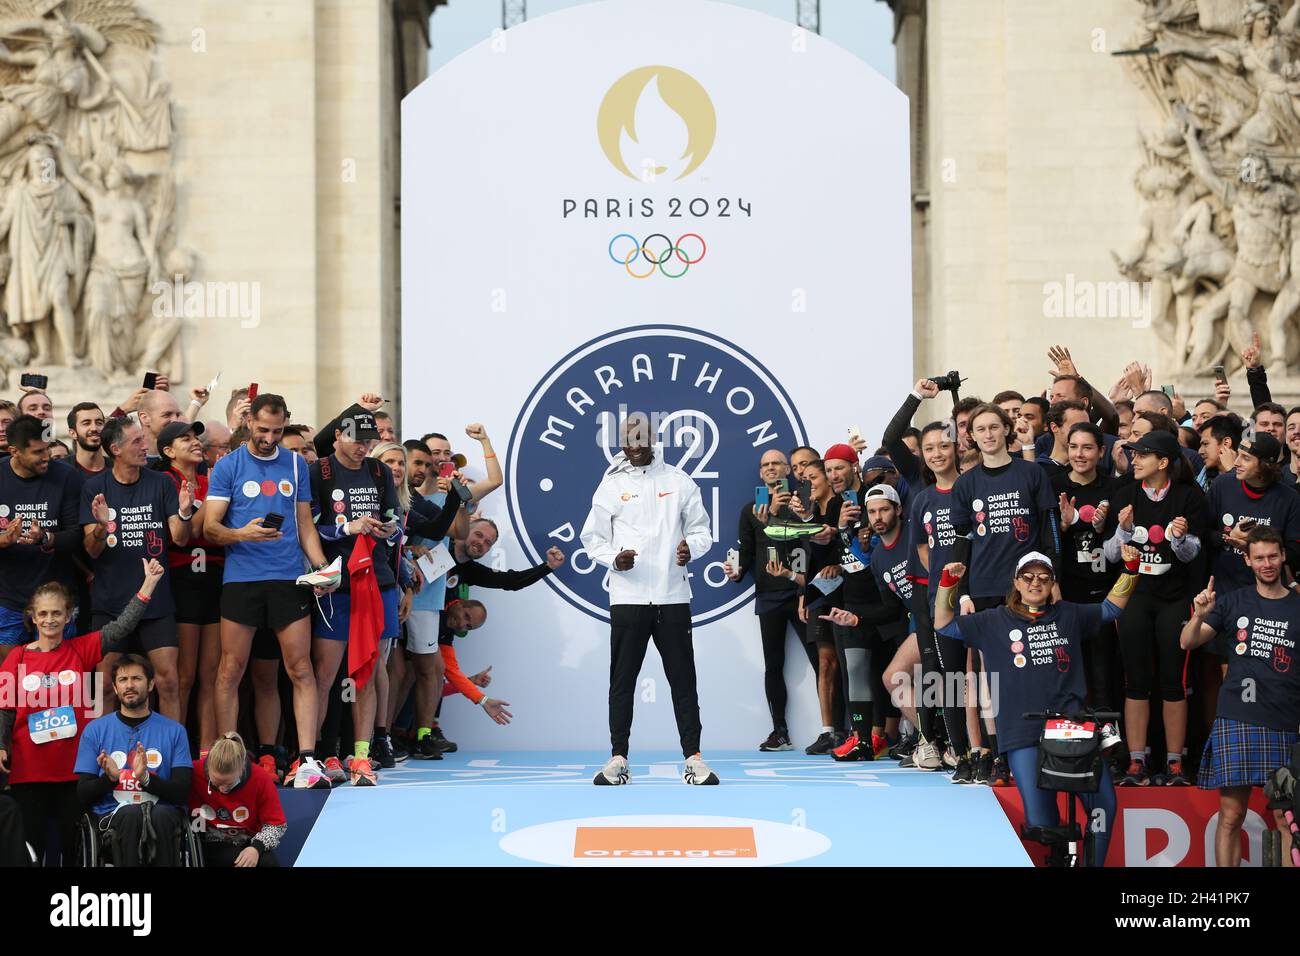 Paris, France. 31st Oct, 2021. Kenya's Eliud Kipchoge (C) poses with participants after the J-1000 Paris 2024 Marathon Pour Tous or Marathon For All, a 5km run along the Champs-Elysees marking the 1000 days countdown to the opening of Paris 2024 Olympic Games, in Paris, France, Oct. 31, 2021. Credit: Gao Jing/Xinhua/Alamy Live News Stock Photo